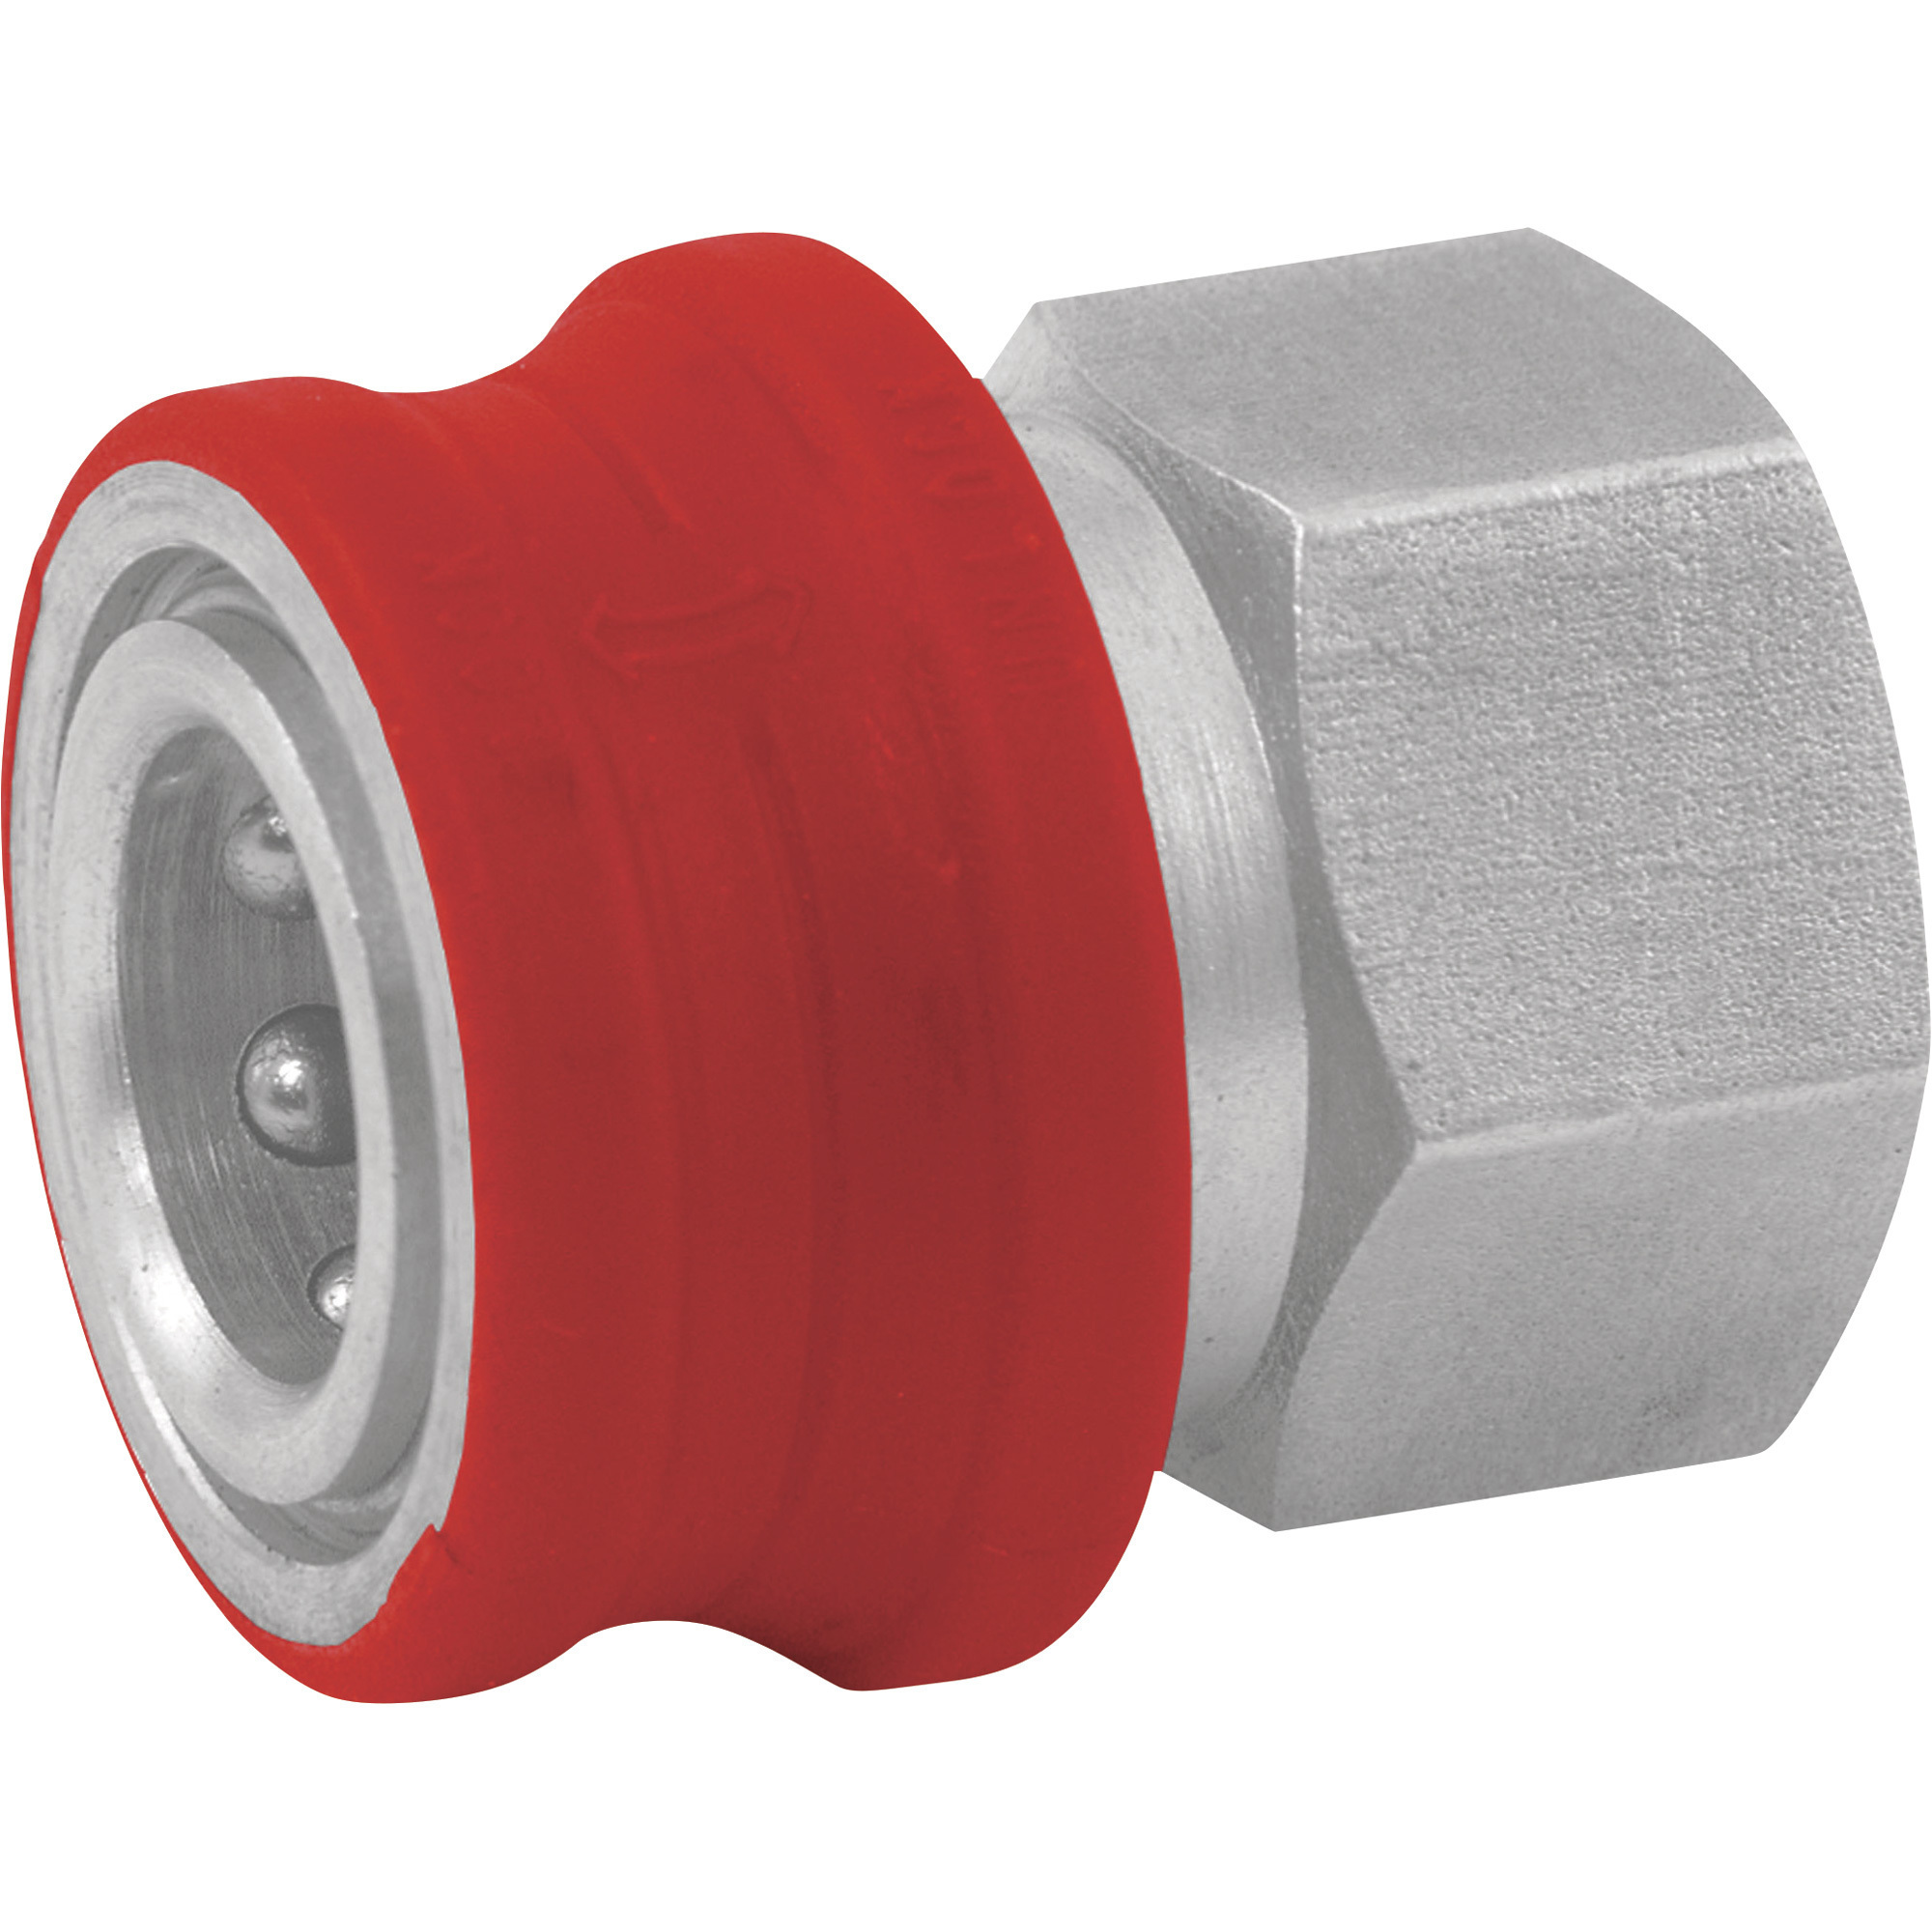 NorthStar Pressure Washer Insulated Quick-Connect Coupler â 3/8Inch NPT-F, 5000 PSI, 12.0 GPM, Stainless Steel, Model 2100387P